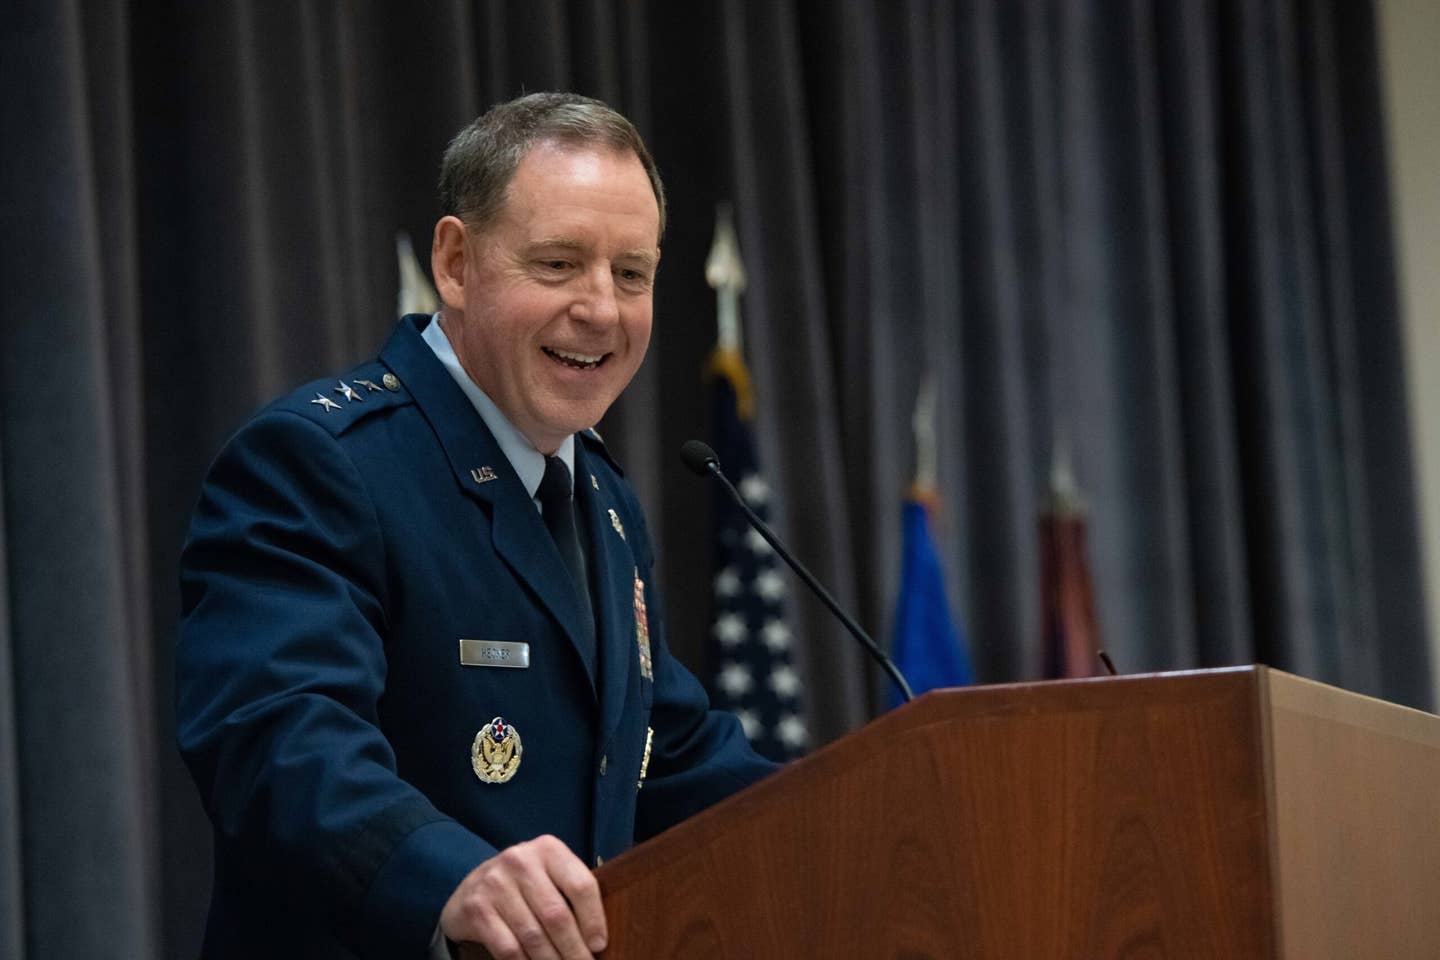 Lt. Gen. James B. Hecker, head of U.S. Air Forces in Europe (USAFE), NATO’s Allied Air Command, and U.S. Air Forces Africa (AFAFRICA). <em>U.S. Air Force photo by Melanie Rodgers Cox</em>